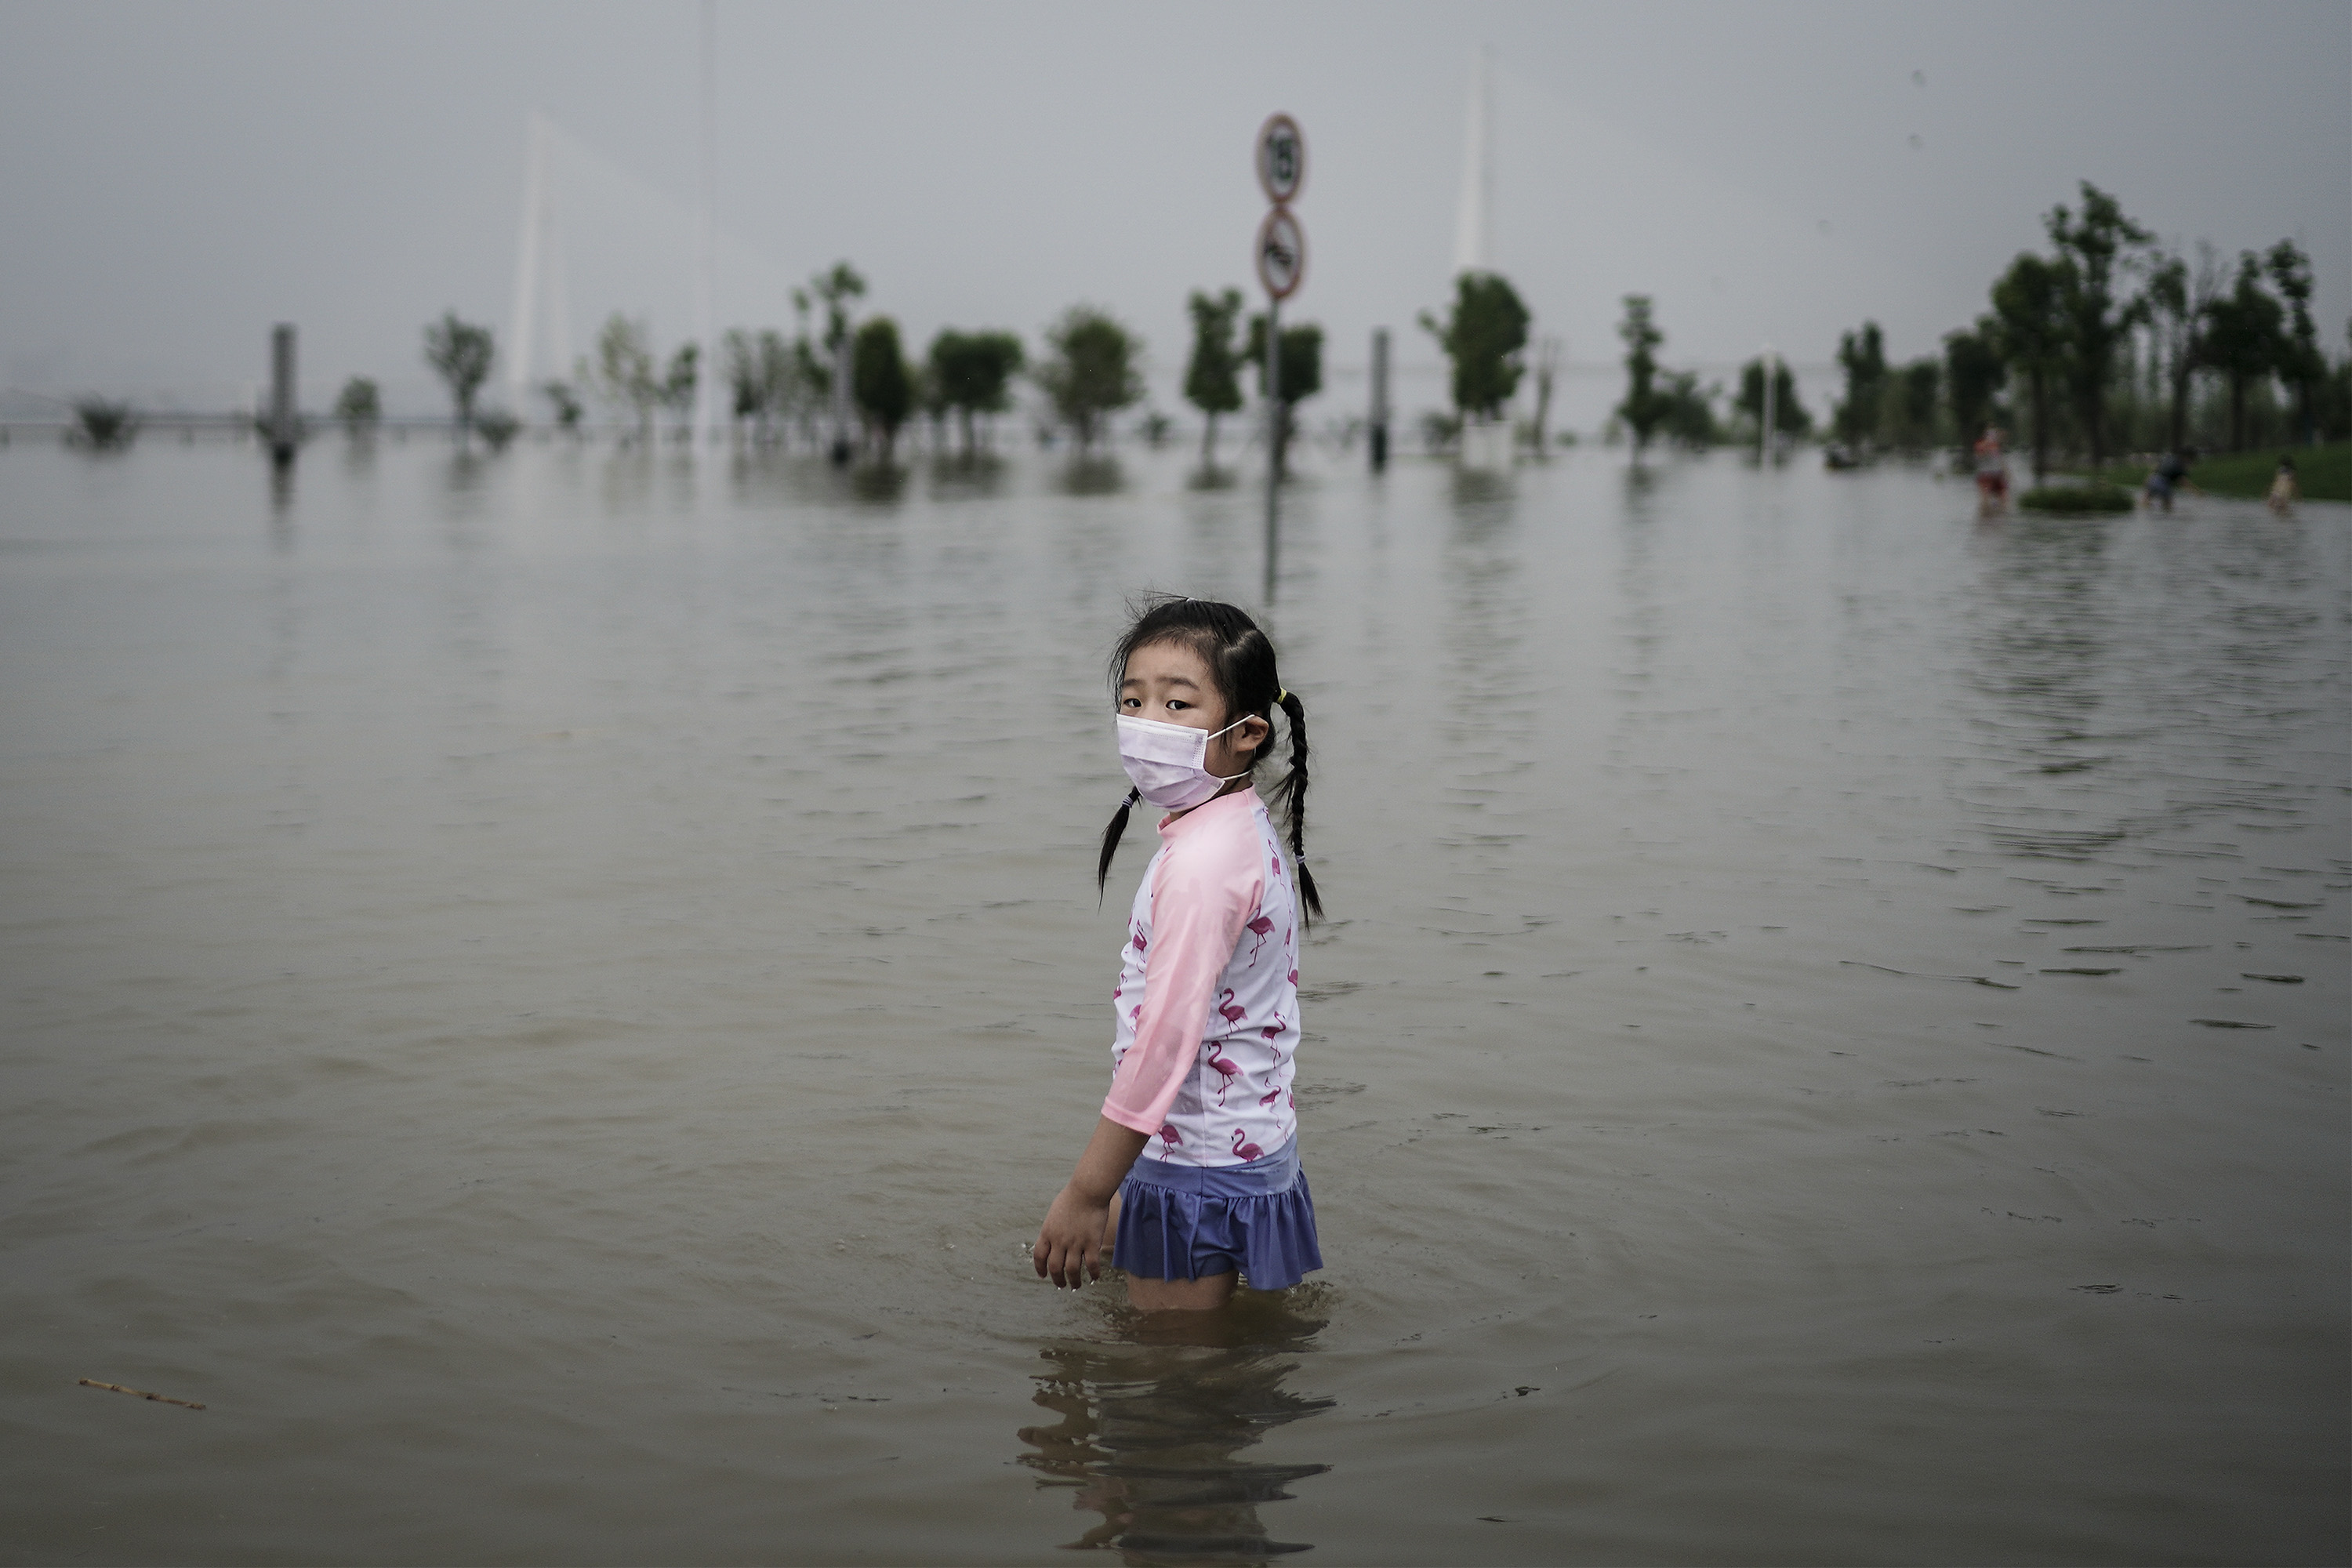 A girl plays in a flooded park in Wuhan on July 10.